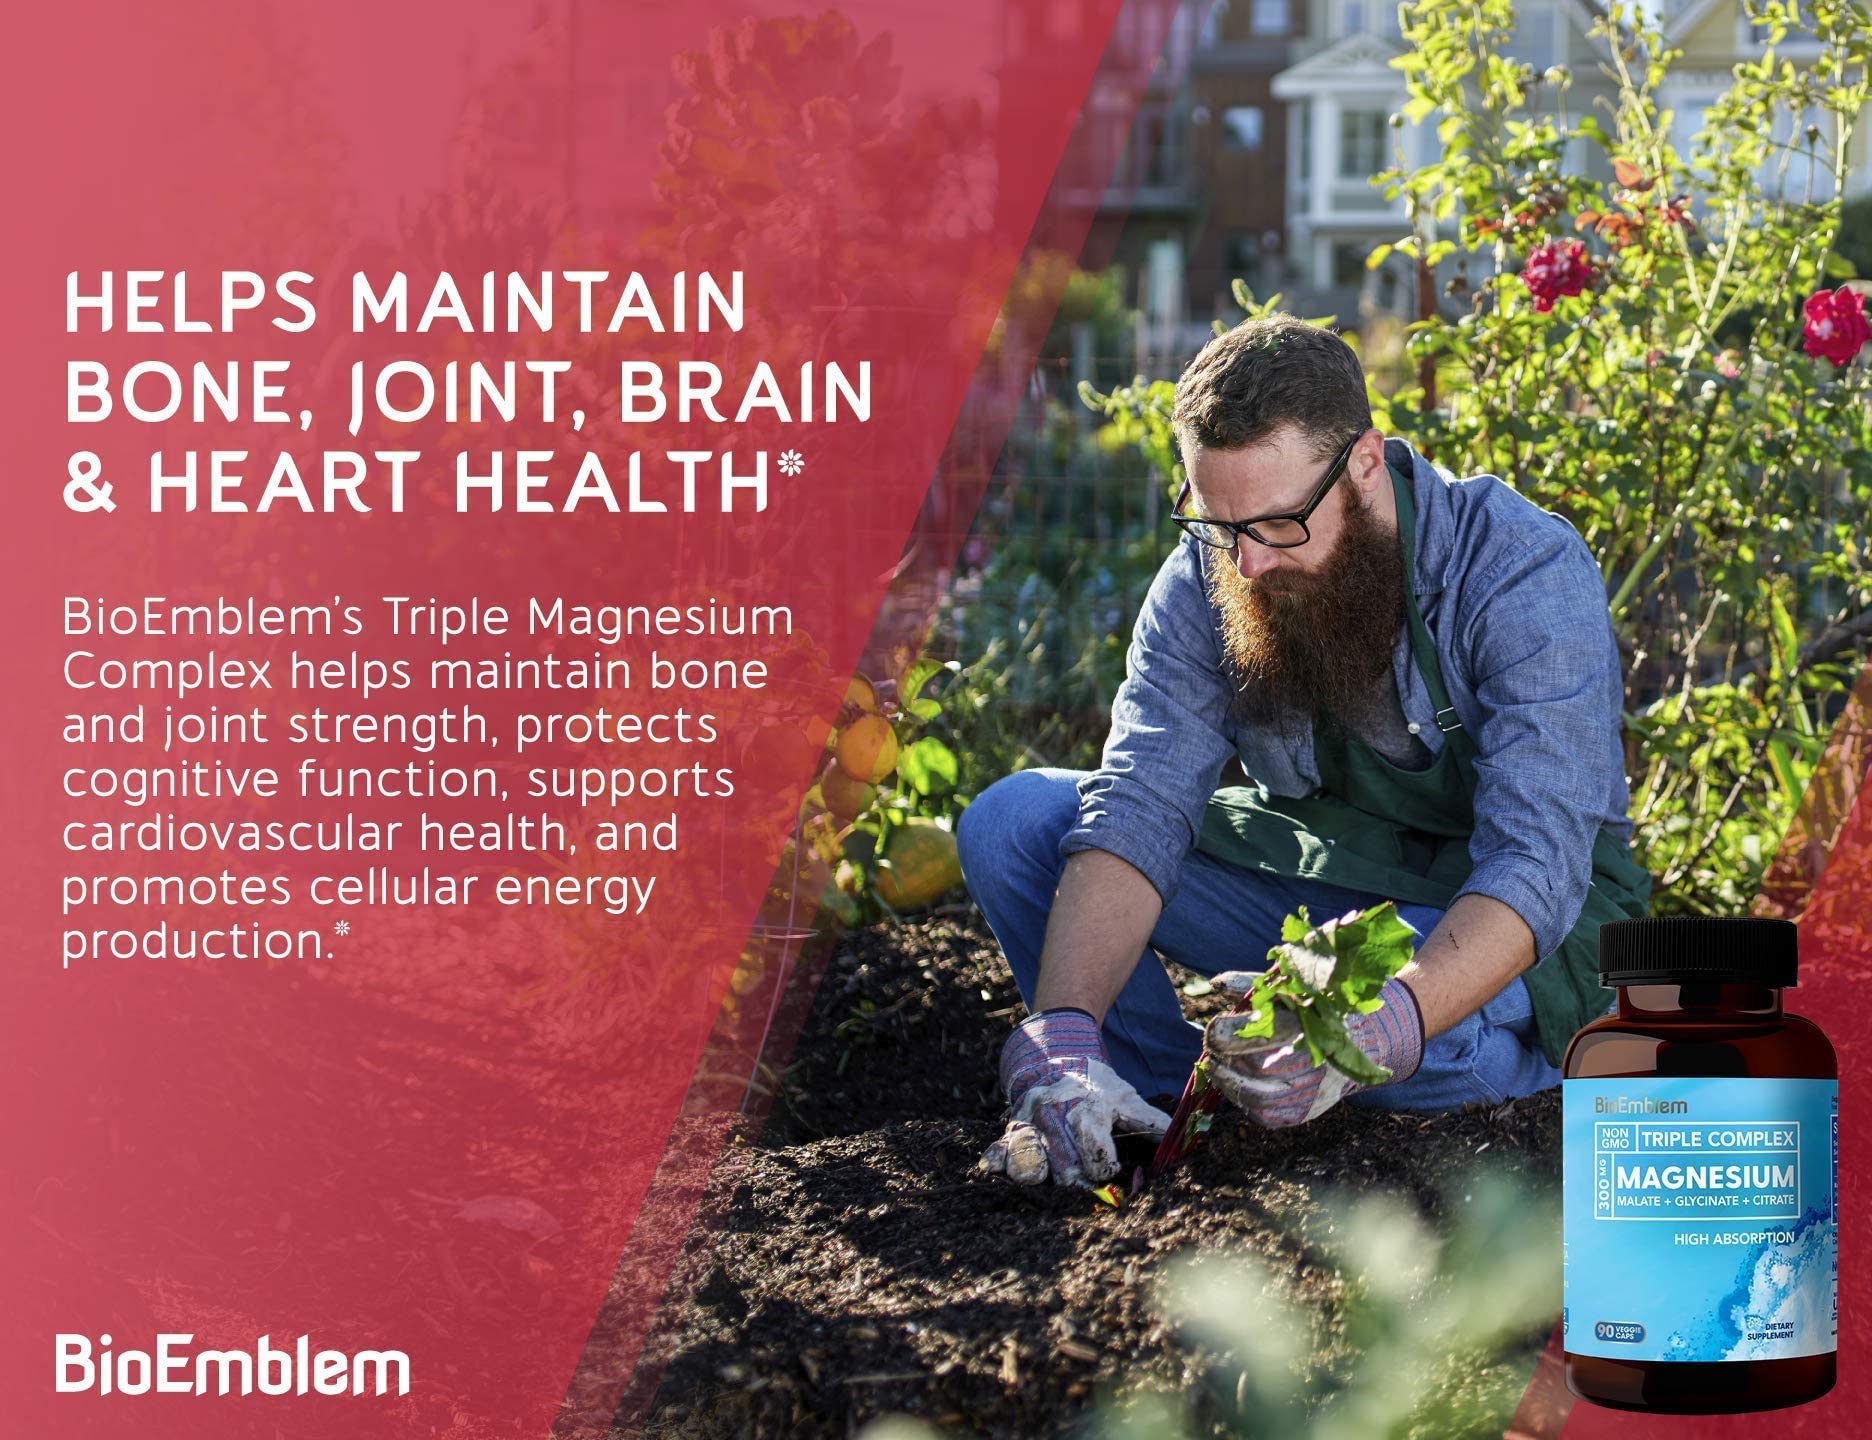 BioEmblem Triple Magnesium Complex and BioEmblem Turmeric Curcumin with Clinically Studied TurmiPure - Joint Support, Healthy Inflammation Turmeric Supplements